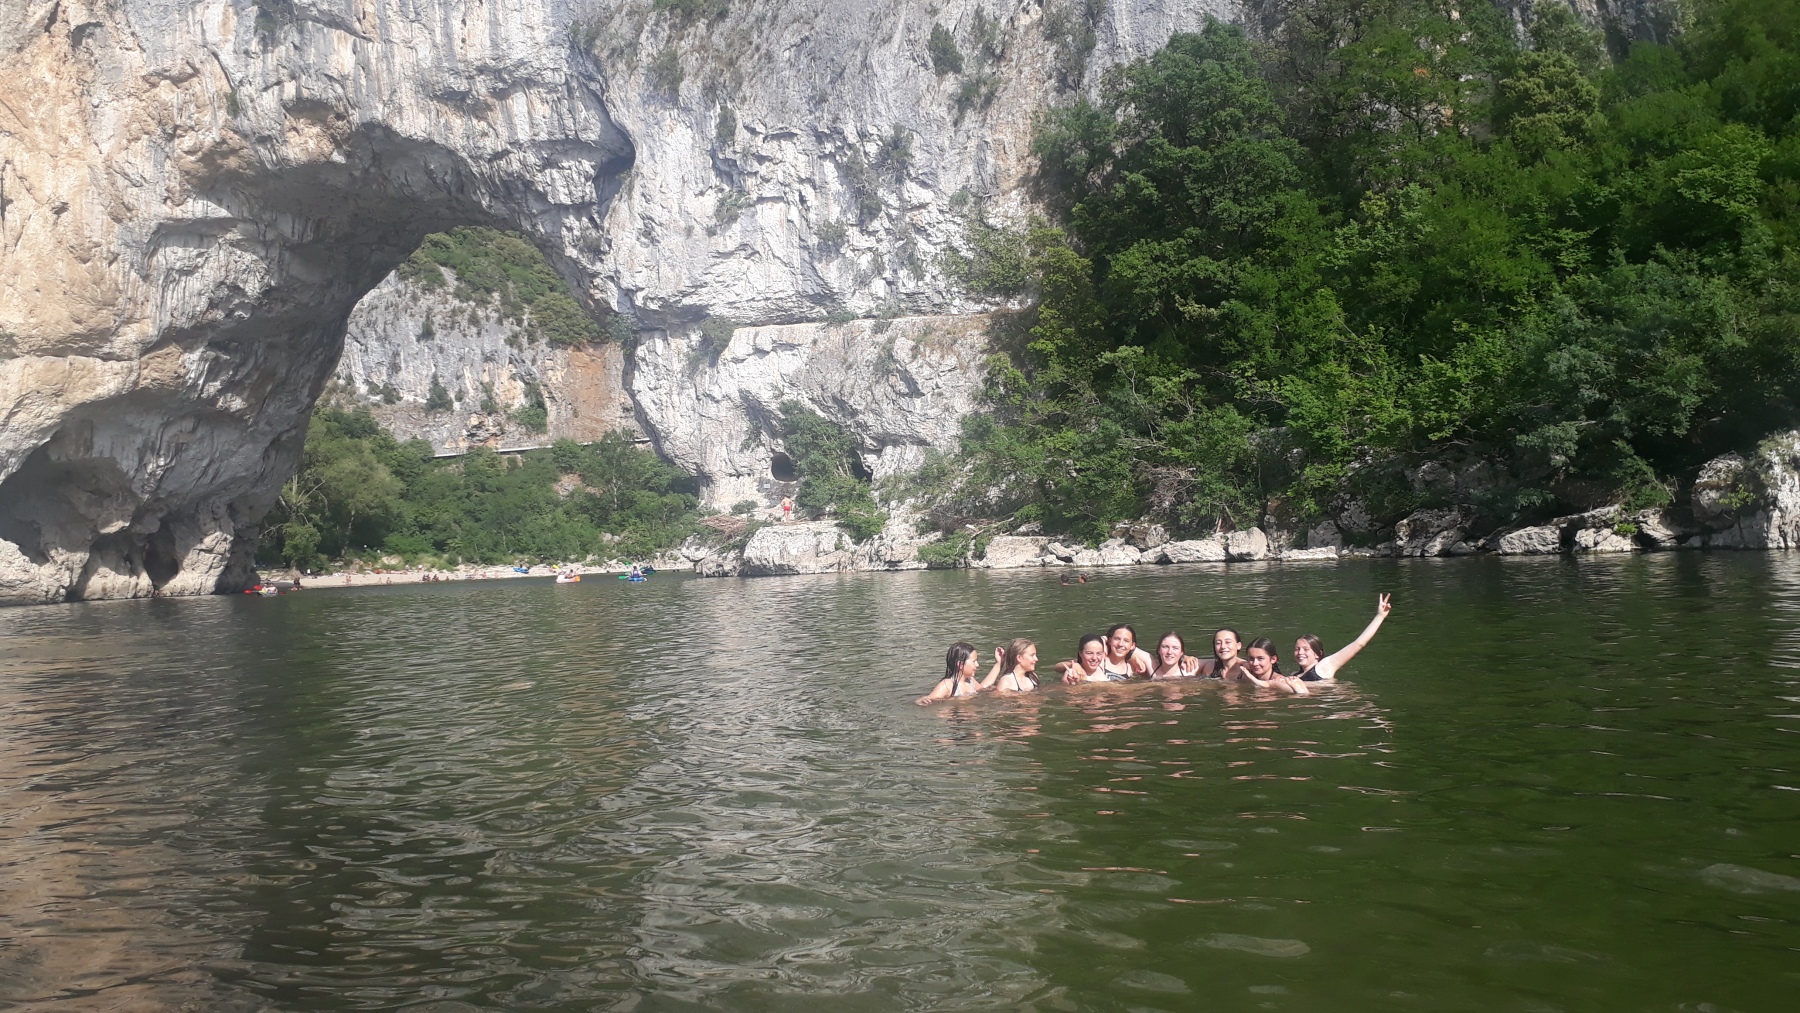 You are currently viewing 2022-Week-end groupe jeunes à Vallon pont d’arc